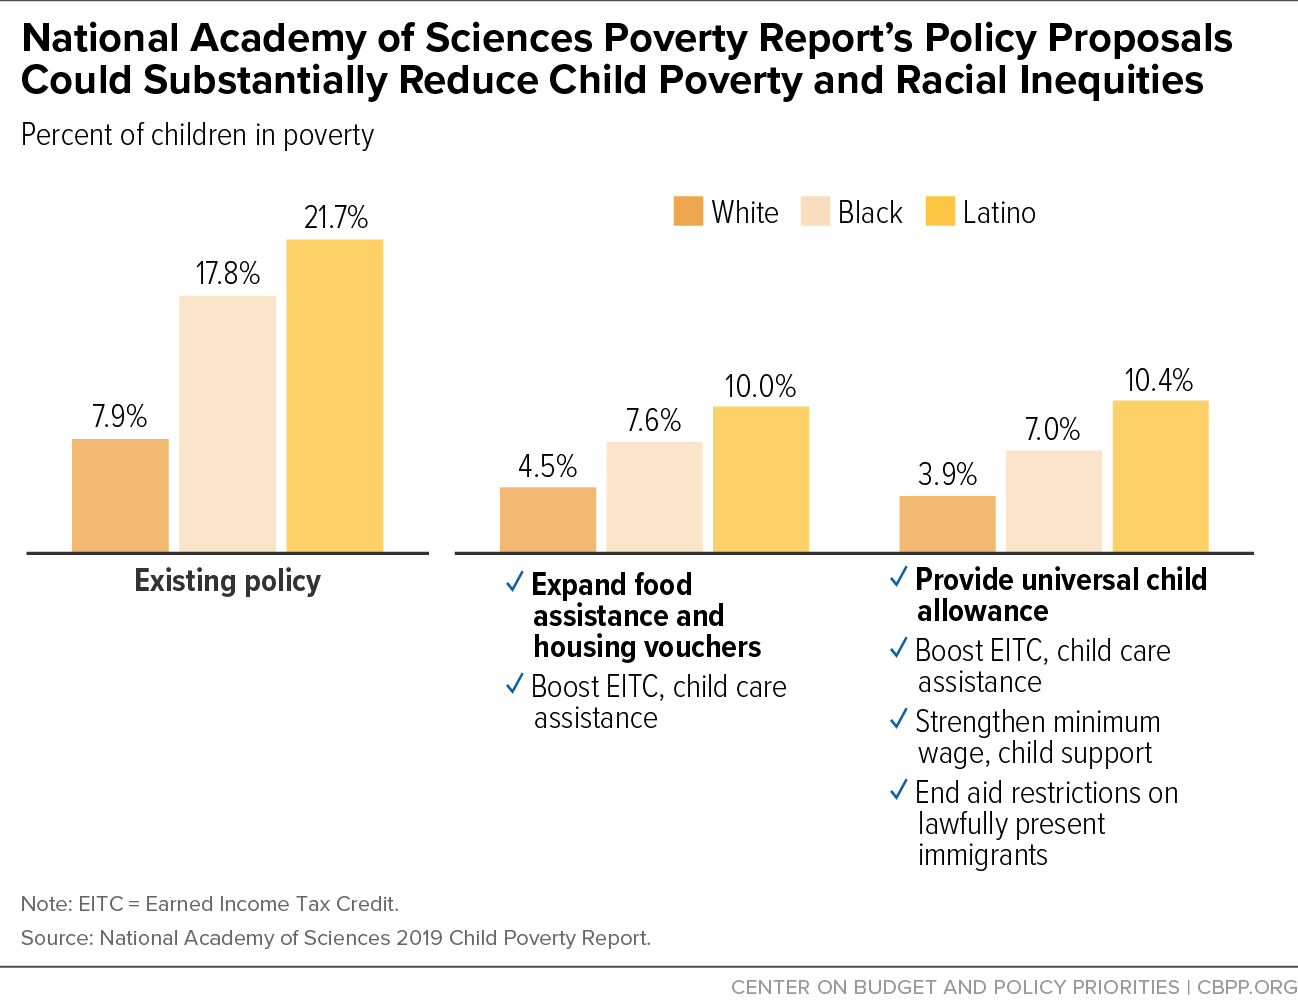 National Academy of Sciences Poverty Report’s Policy Proposals Could Substantially Reduce Child Poverty and Racial Inequities